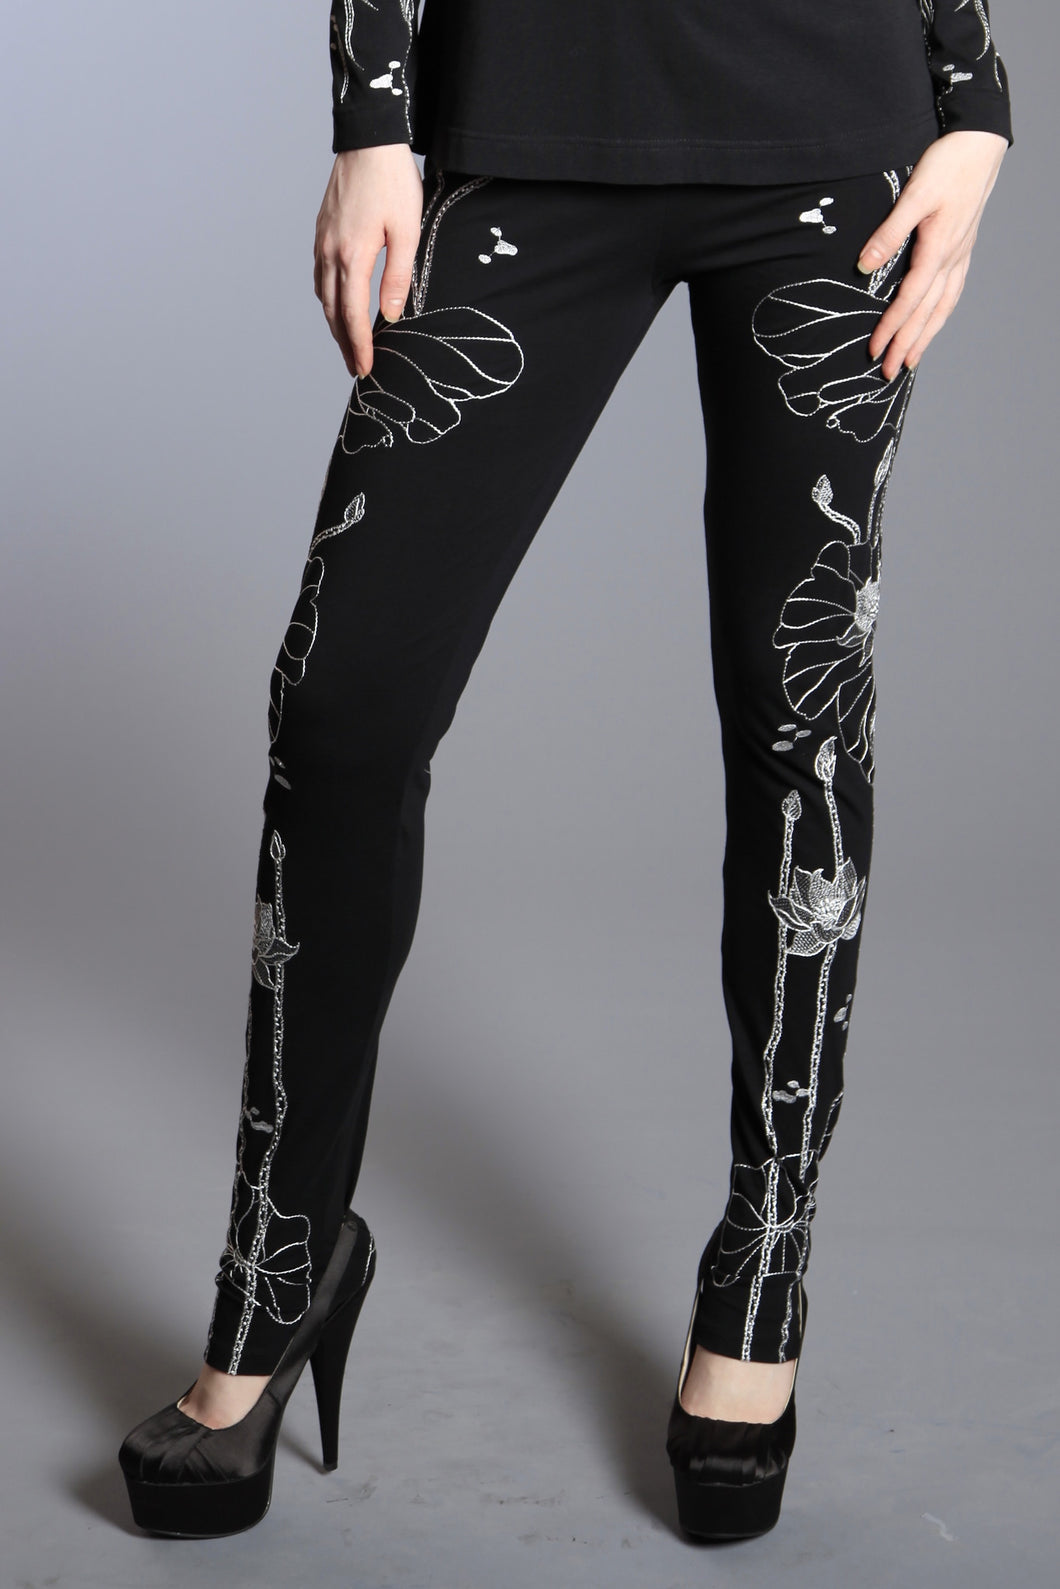 Embroidered Black and White Lotus Leggings 10819